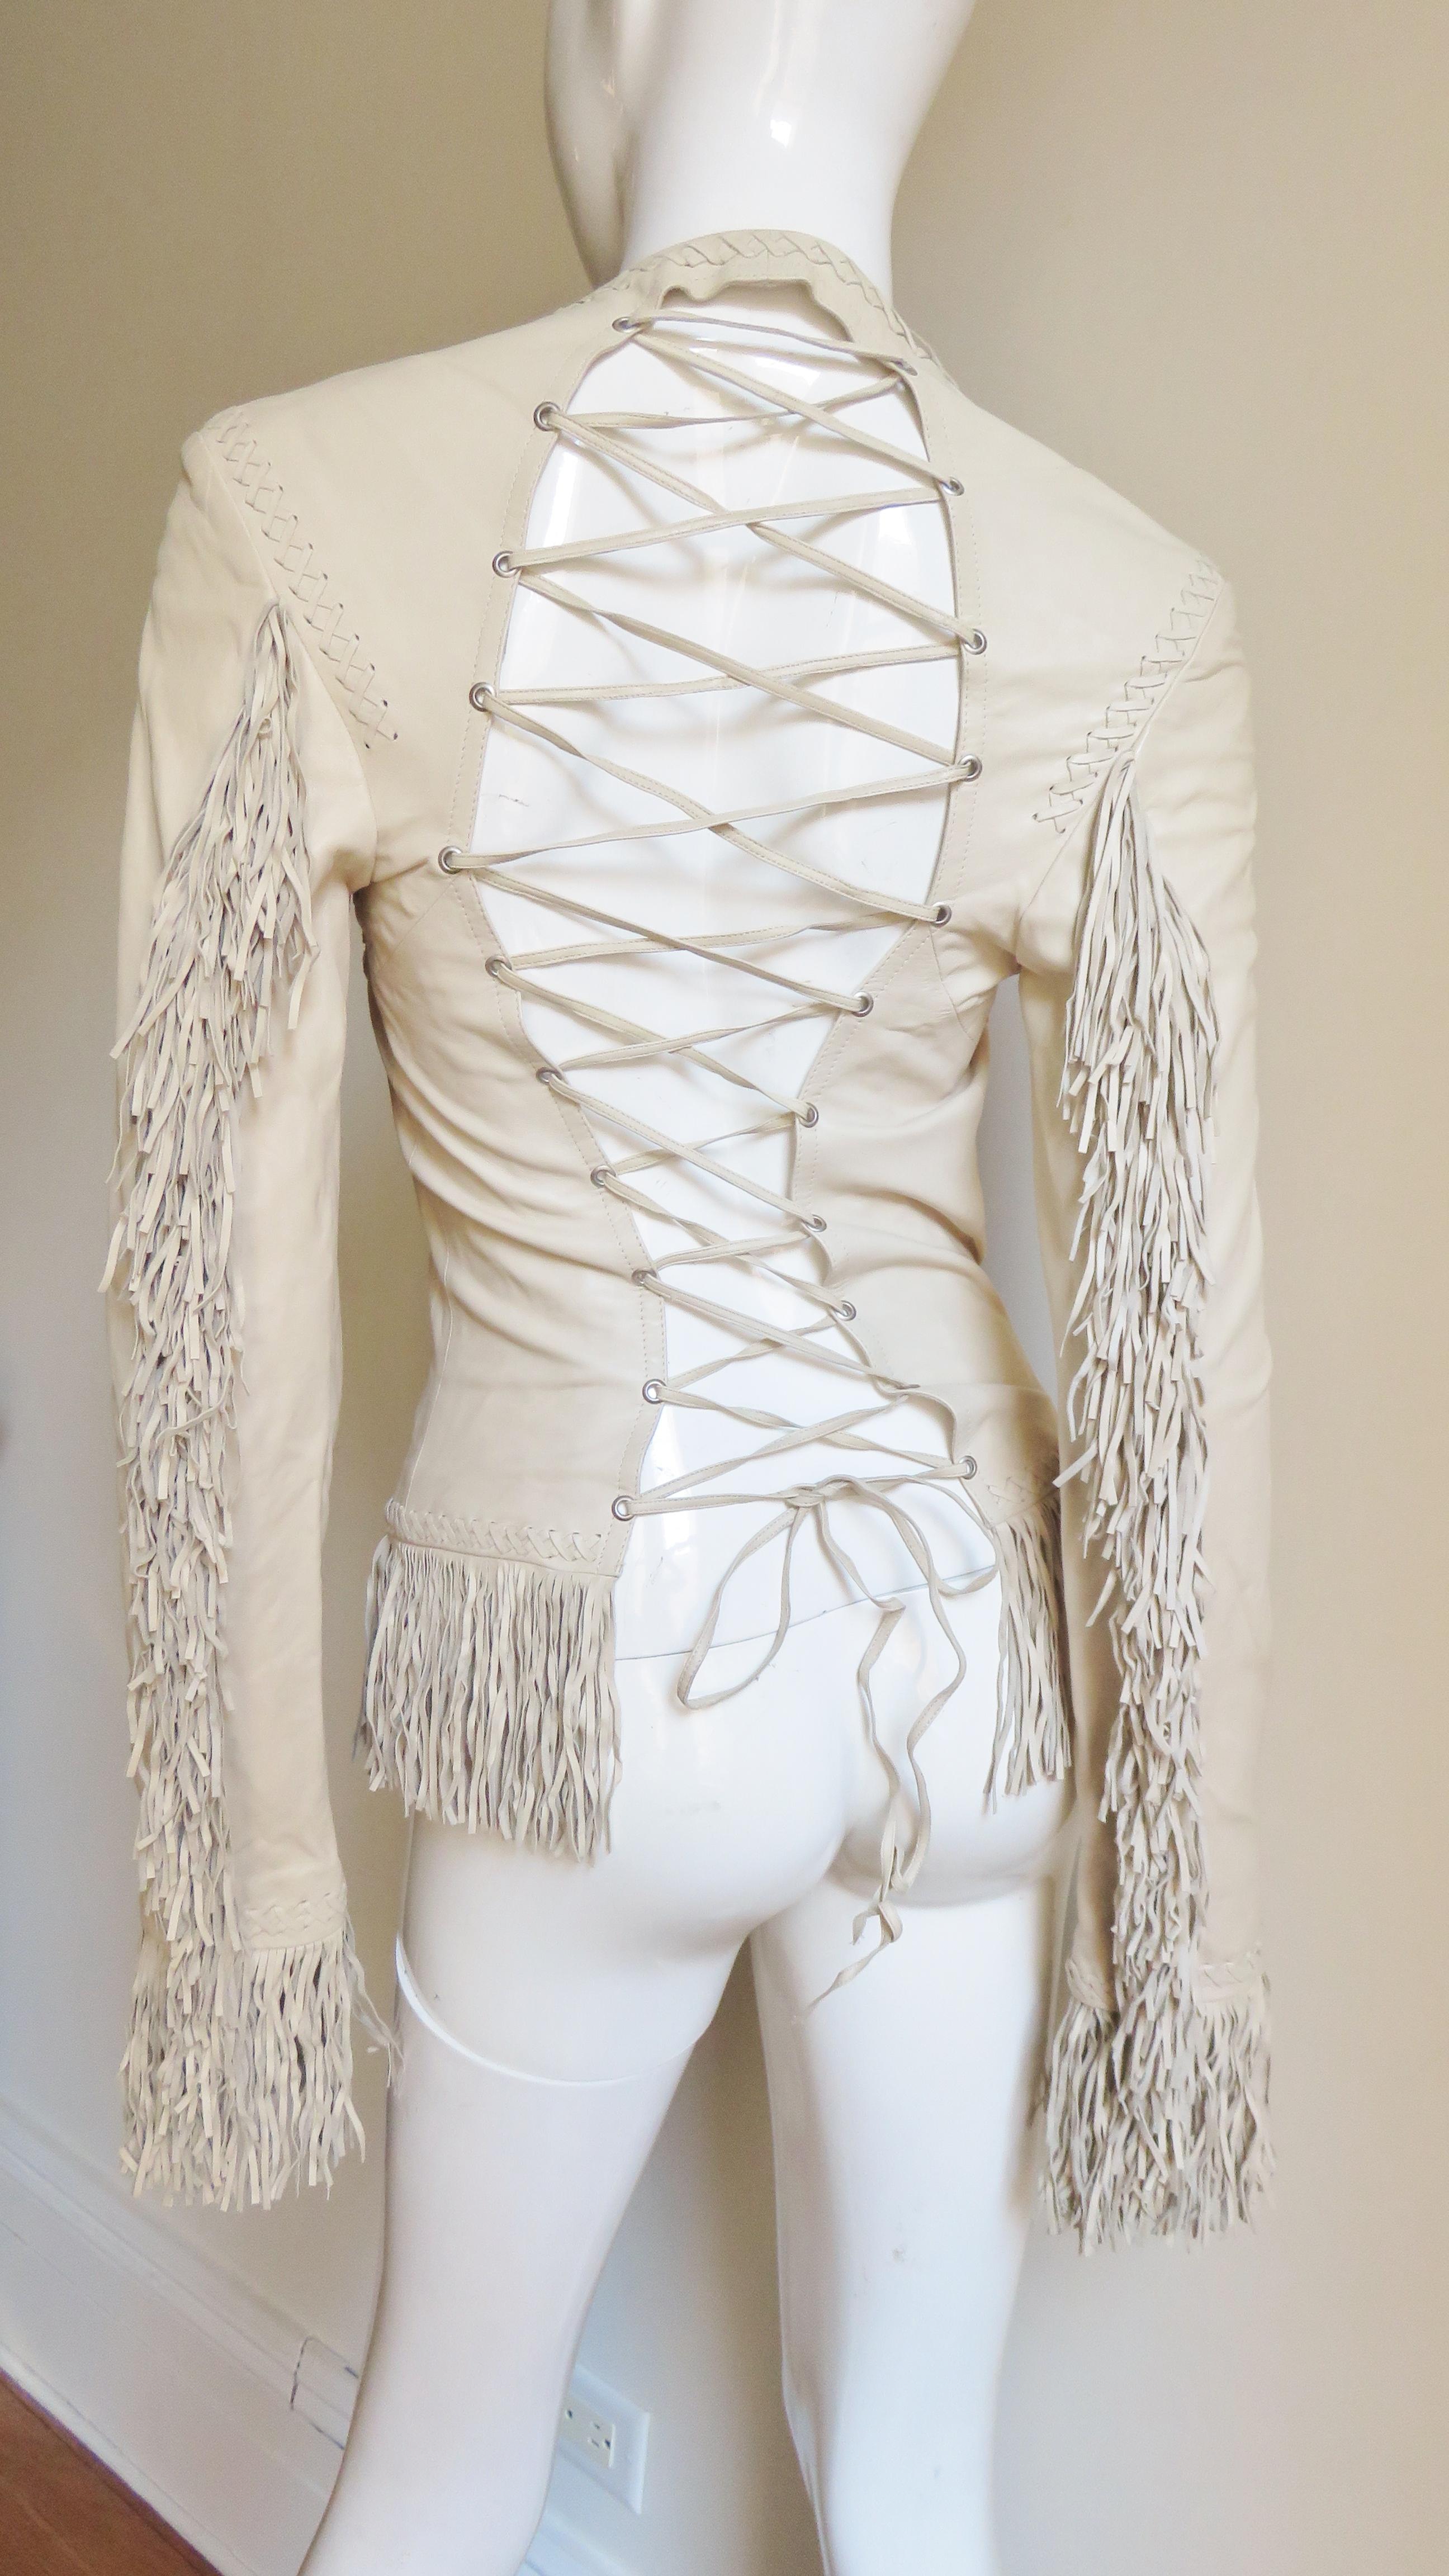 A fabulous soft, supple, fine, off white leather fringe jacket from Gianni Versace. It is fitted with vertical seaming which is highlighted with intricate hand braiding plus 4